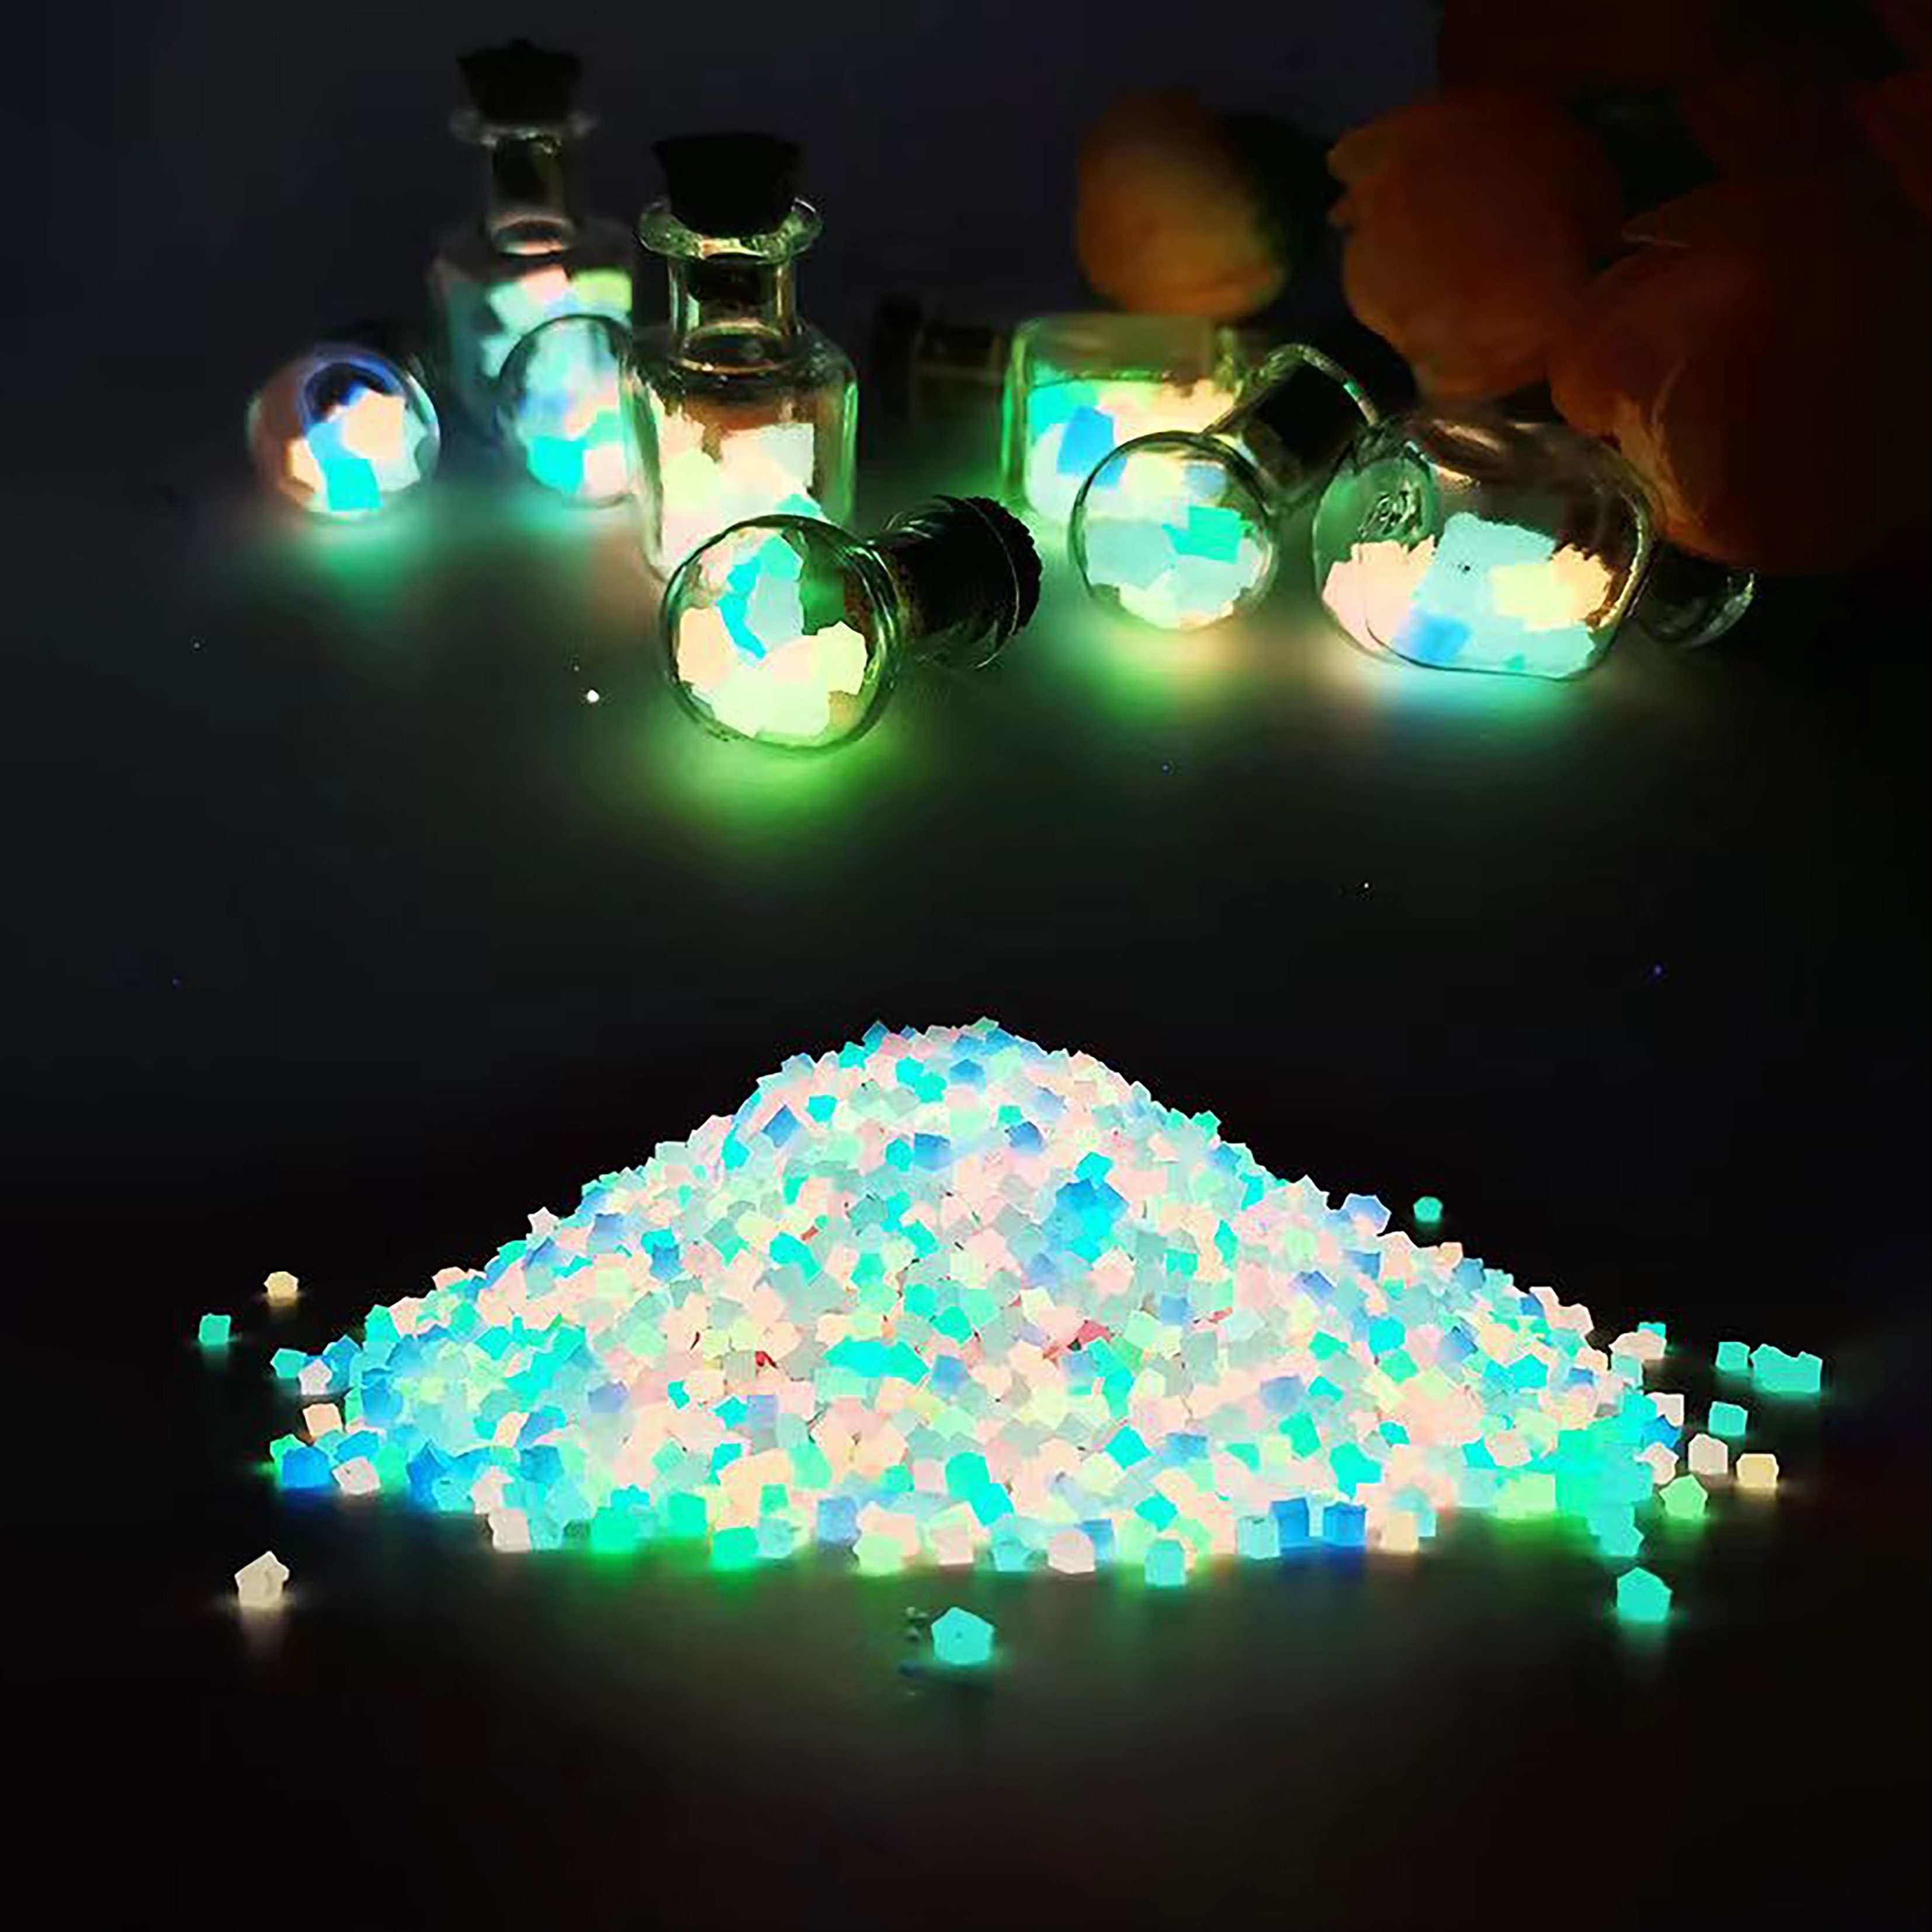 

4050pcs Glow-in-the-dark Colored Sand - Perfect For Beach Themed Decorations, Pool Parties, Graduations, And Weddings! (100g)